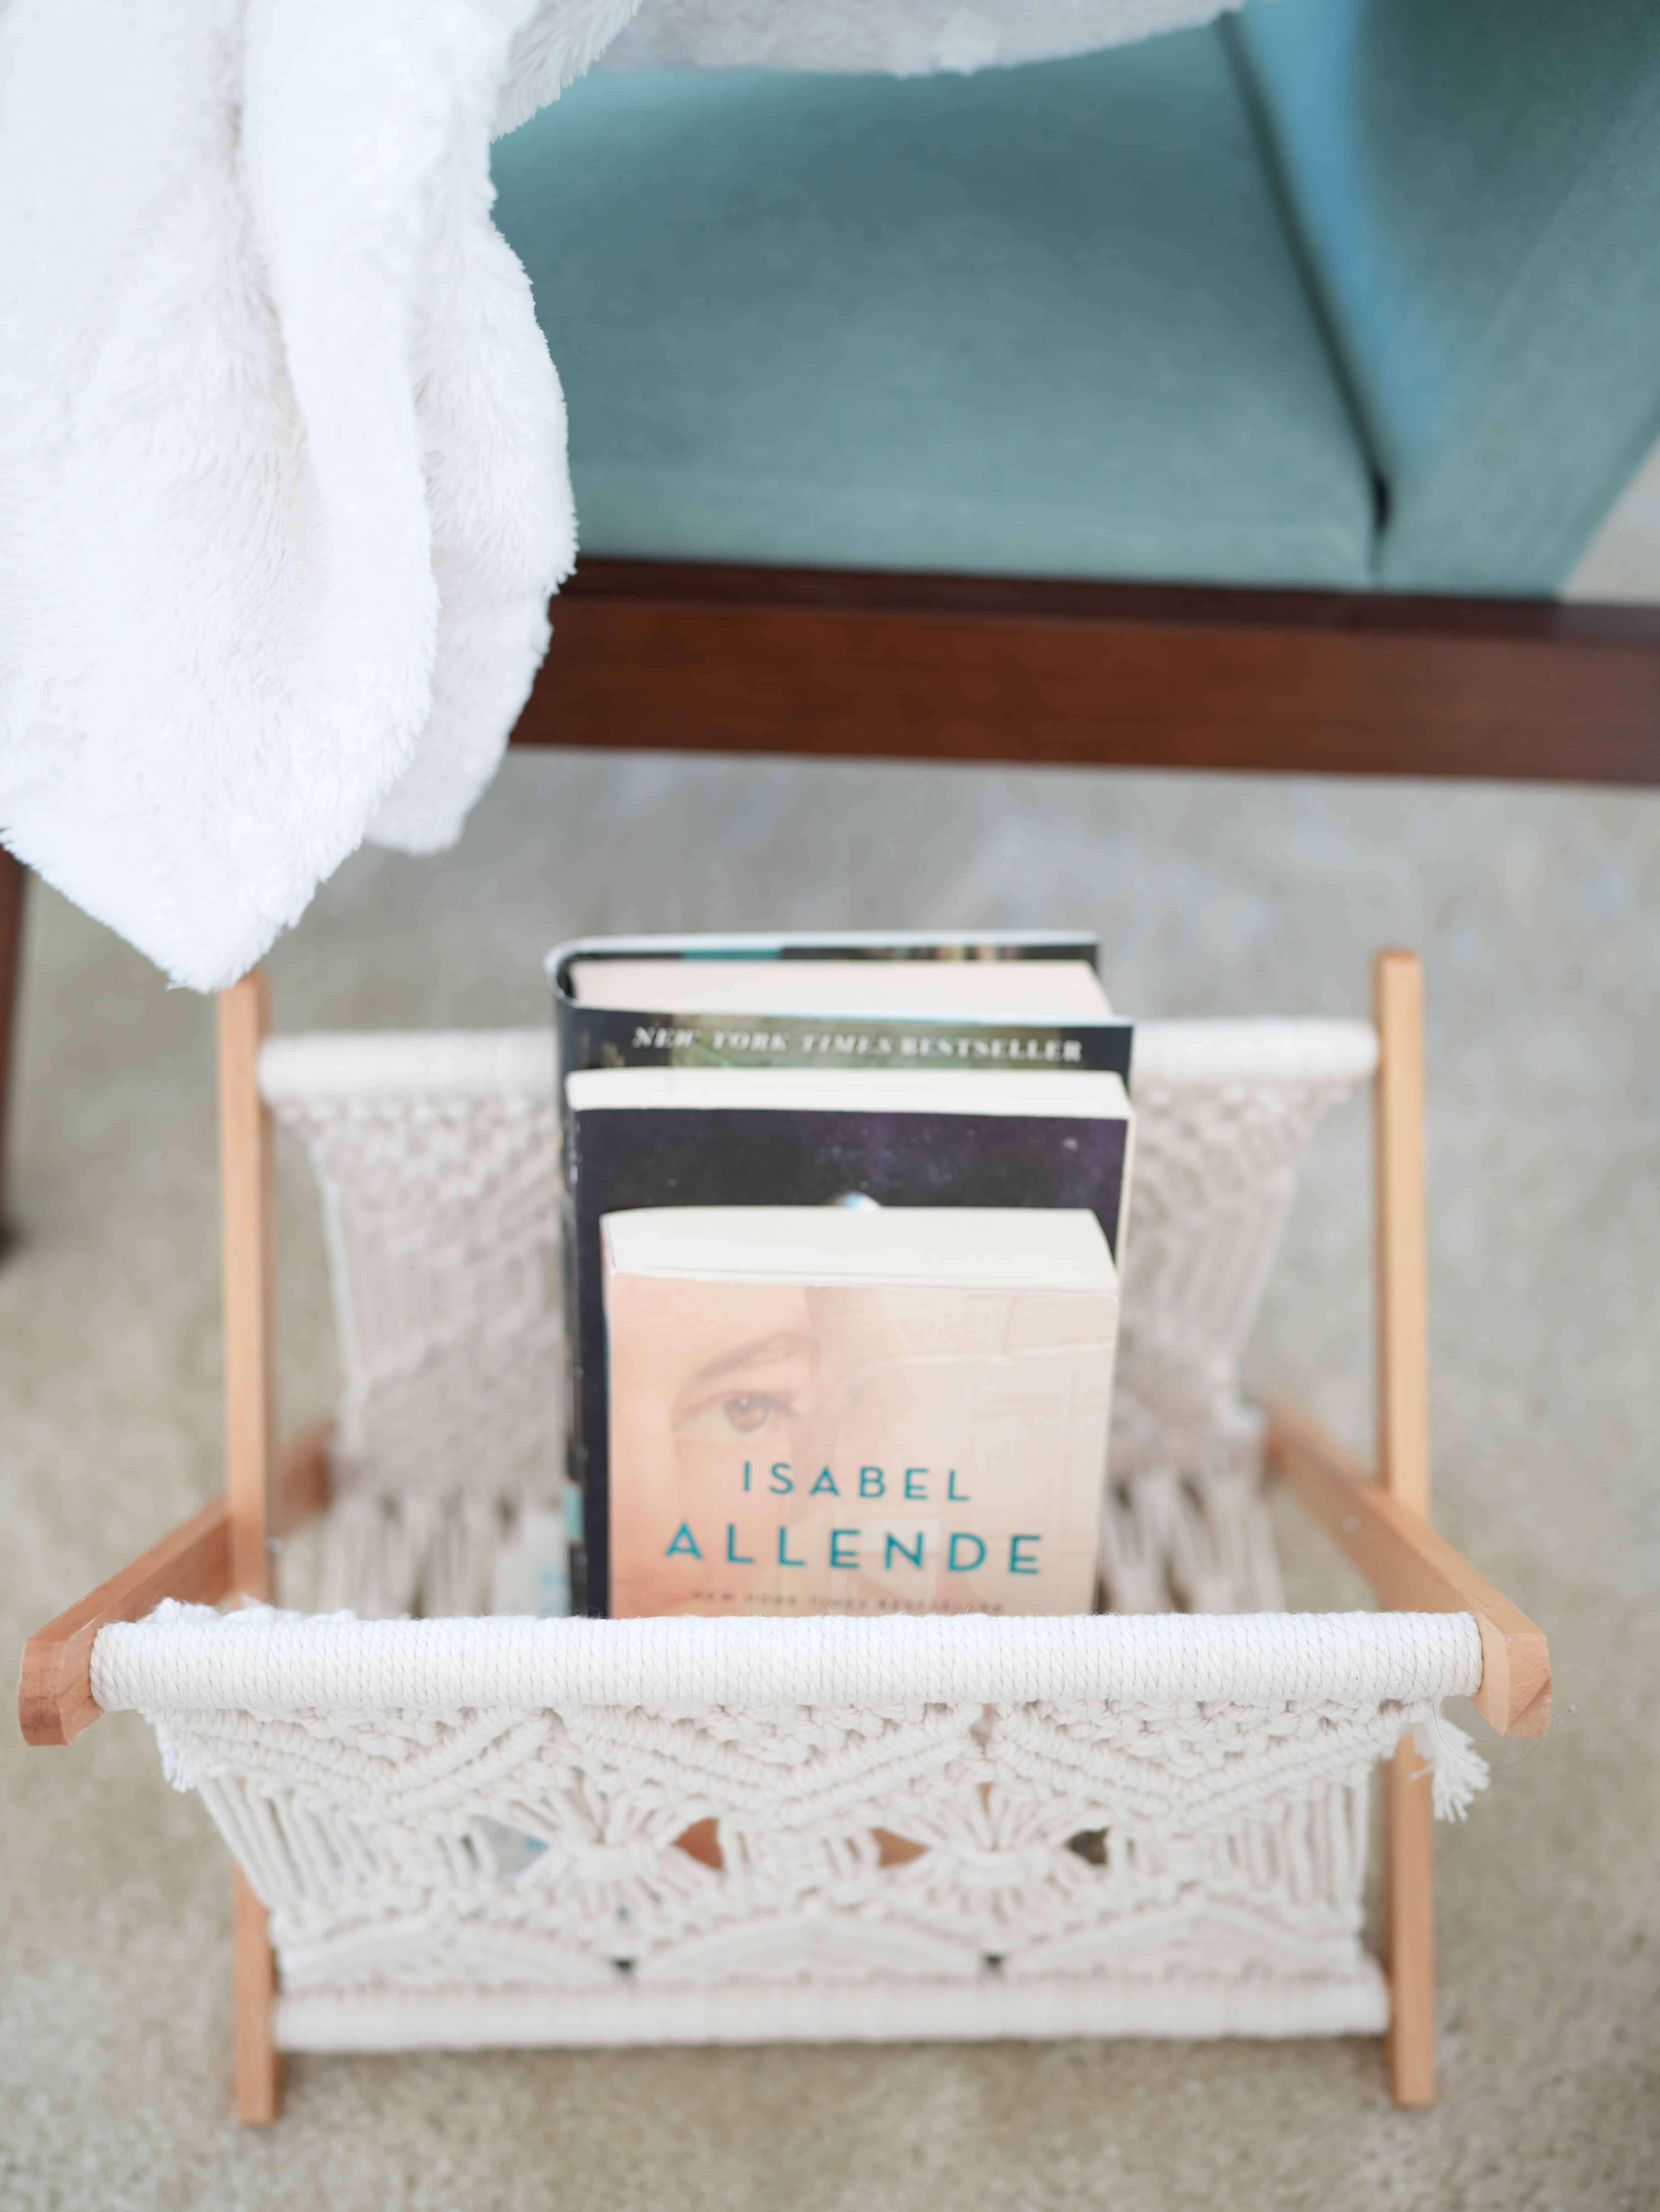 Magazine holder made of wood and crocheted yarn. Holding three books, one with a cover that reads "Isabel Allende".